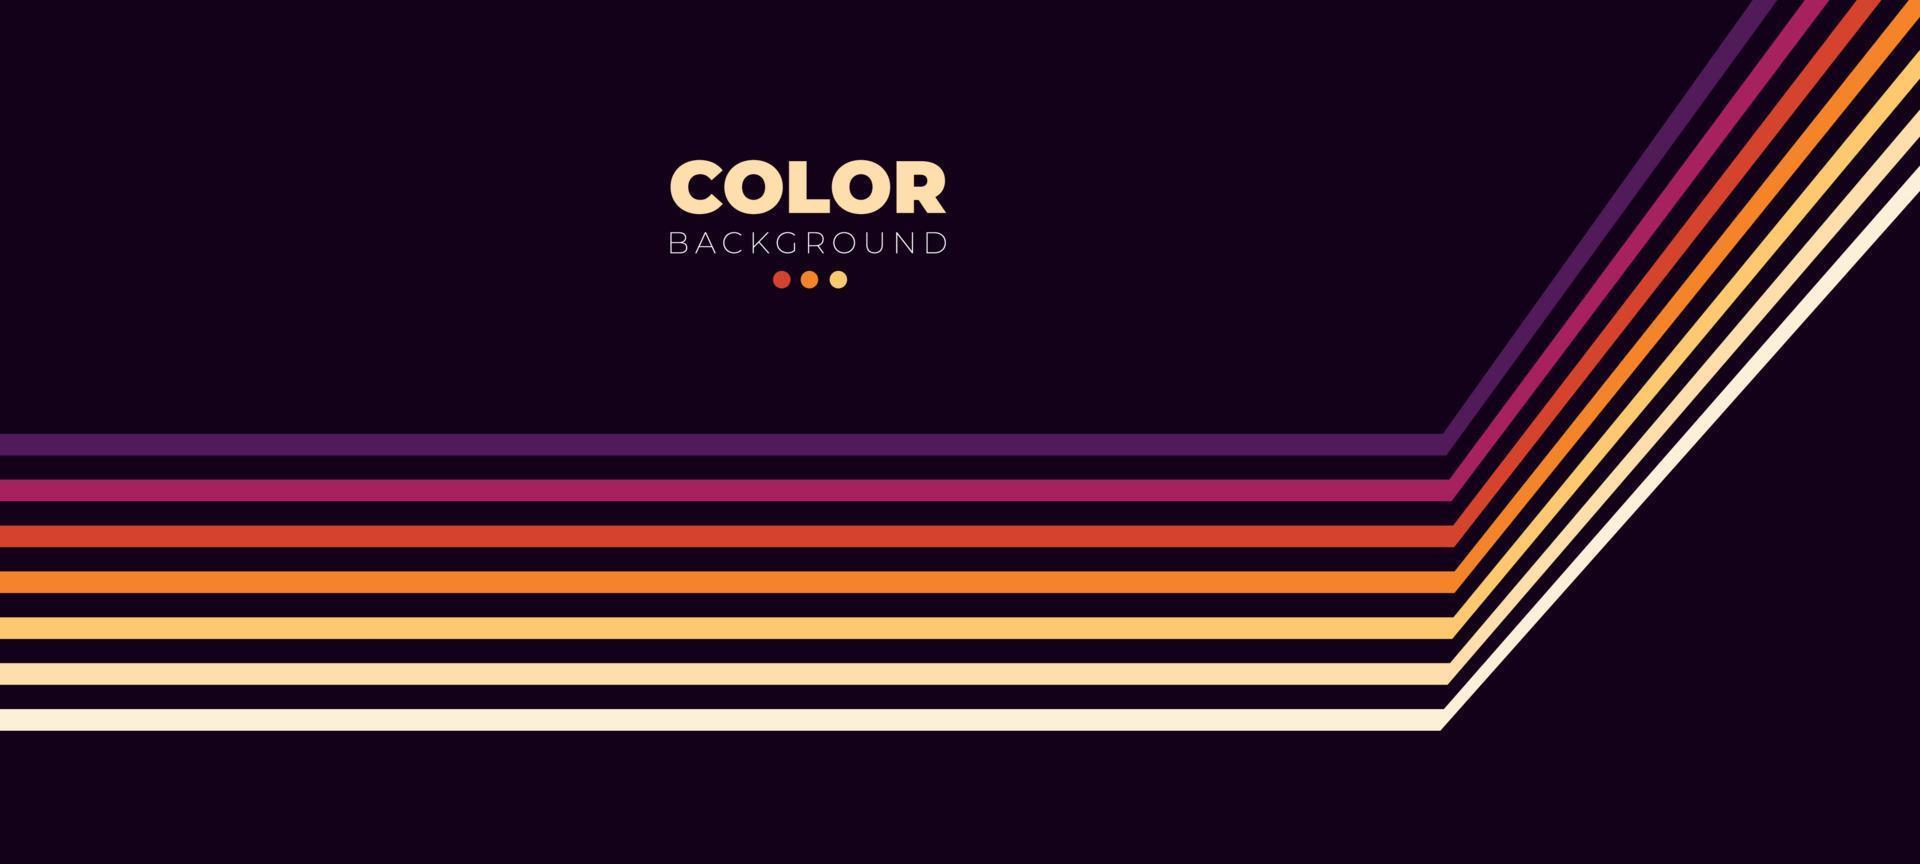 Abstract 1970's background design in futuristic retro style with colorful lines. Abstract simple colorful striped lines in retro style. colorful line dark background design.  Vector illustration.